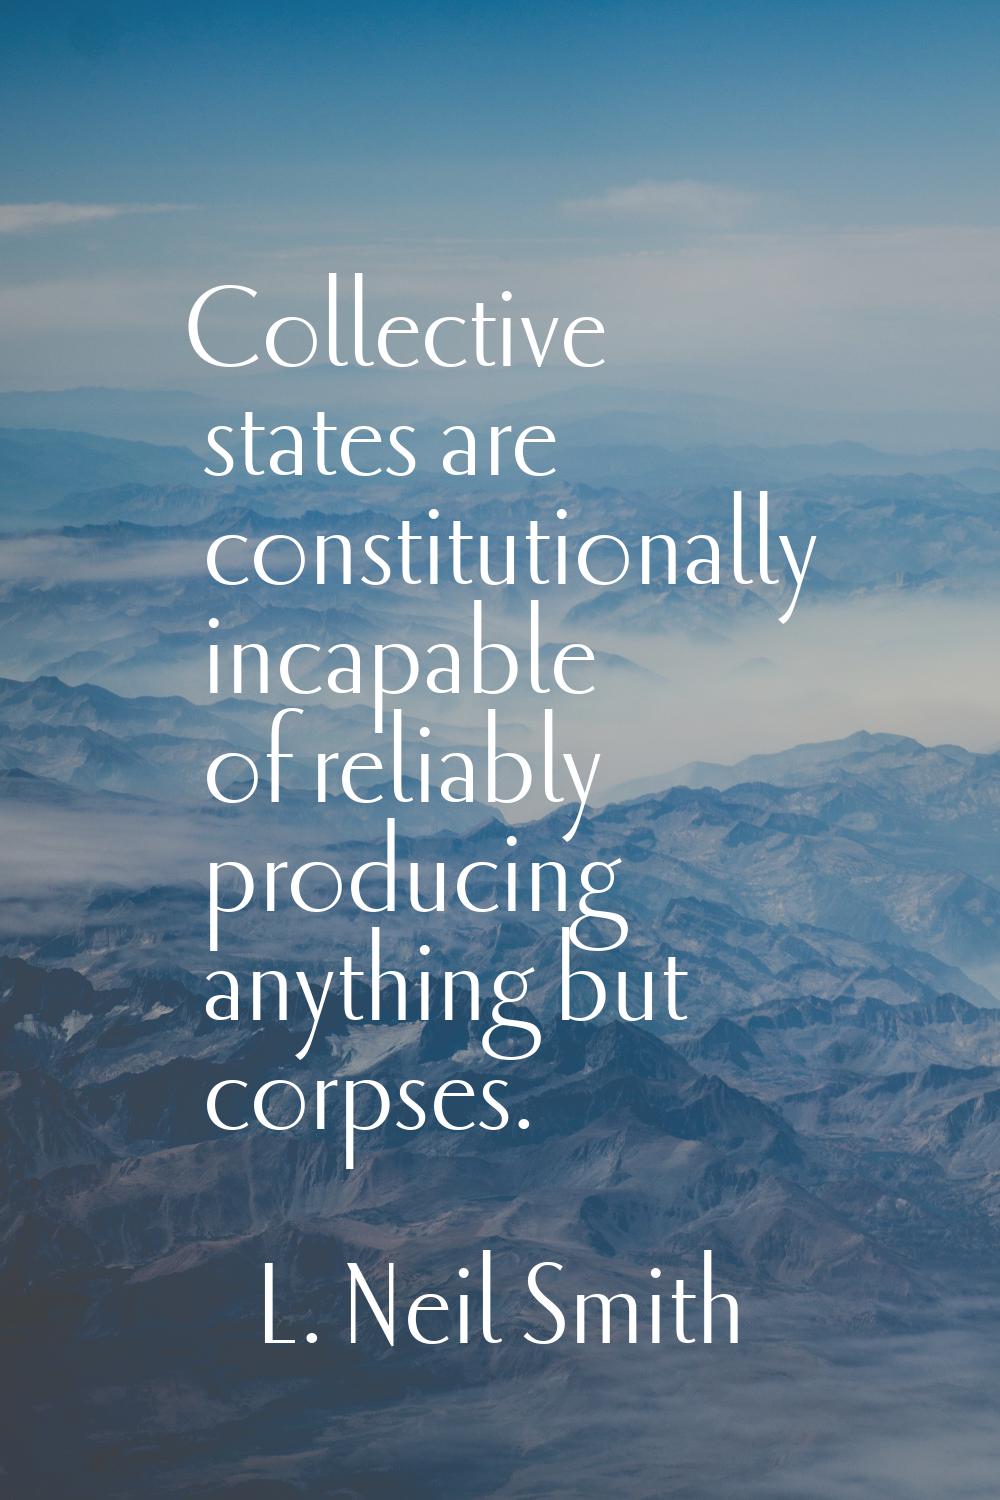 Collective states are constitutionally incapable of reliably producing anything but corpses.